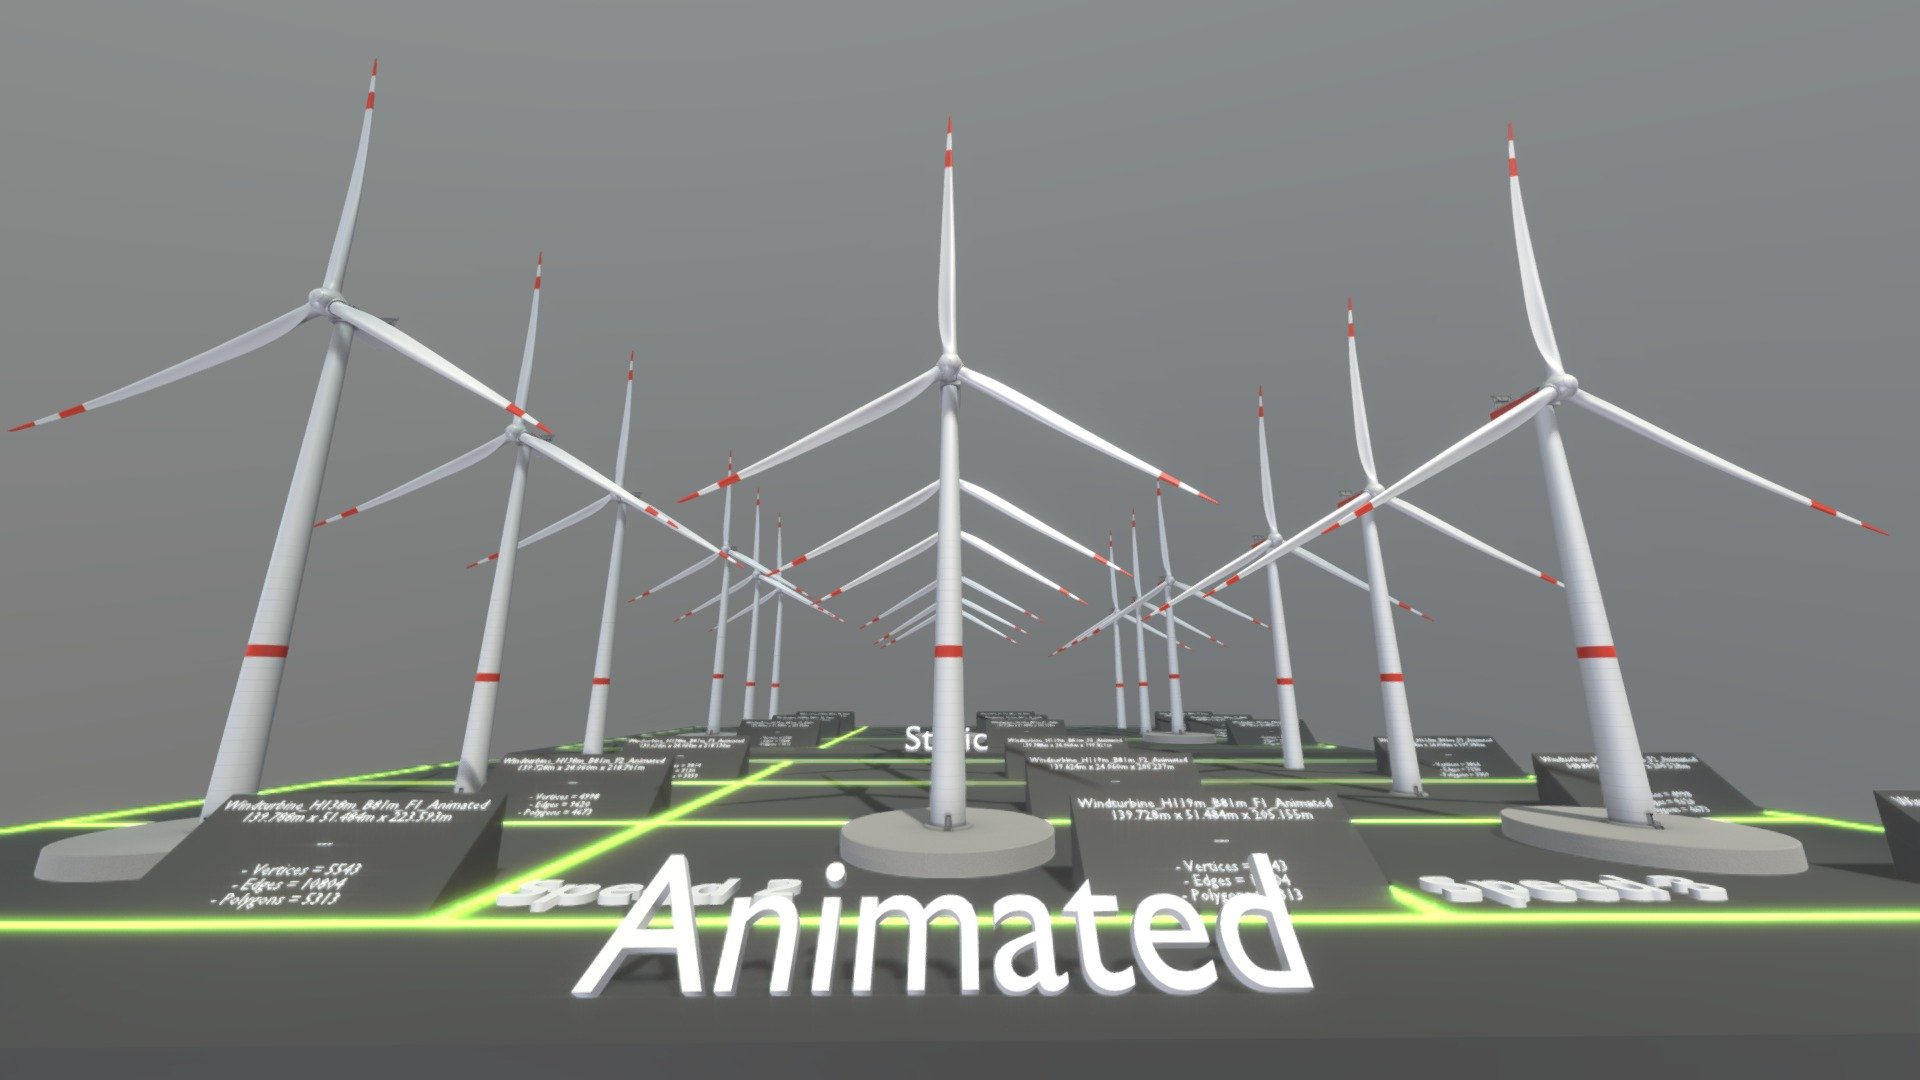 Windturbine H114m - H119m - H138m animated and with different foundations.






F = Foundation

B = Blade-Length

H = Hub-High

m = Meters






Windturbine_H114m_B86m_F1_Static

Windturbine_H114m_B86m_F2_Static

Windturbine_H114m_B86m_F3_Static

Windturbine_H119m_B81m_F1_Static

Windturbine_H119m_B81m_F2_Static

Windturbine_H119m_B81m_F3_Static

Windturbine_H138m_B81m_F1_Static

Windturbine_H138m_B81m_F2_Static

Windturbine_H138m_B81m_F3_Static

Windturbine_H119m_B81m_F1_Animation

Windturbine_H138m_B81m_F1_Animation

Windturbine_H114m_B86m_F1_Animation

Windturbine_H138m_B81m_F2_Animation

Windturbine_H119m_B81m_F2_Animation

Windturbine_H114m_B86m_F2_Animation

Windturbine_H138m_B81m_F3_Animation

Windturbine_H119m_B81m_F3_Animation

Windturbine_H114m_B86m_F3_Animation



Material - Windturbine_H114m-H138m:




Blend Mode: OPAQUE

Shadow Mode: OPAQUE

Col_8k.jpg

Ro_8K.jpg

Nor_8k.jpg

Met_8k.jpg






Last update:
17:06:16  19.09.23
 - Windturbine H114m - H119m - H138m - Buy Royalty Free 3D model by VIS-All-3D (@VIS-All) 3d model